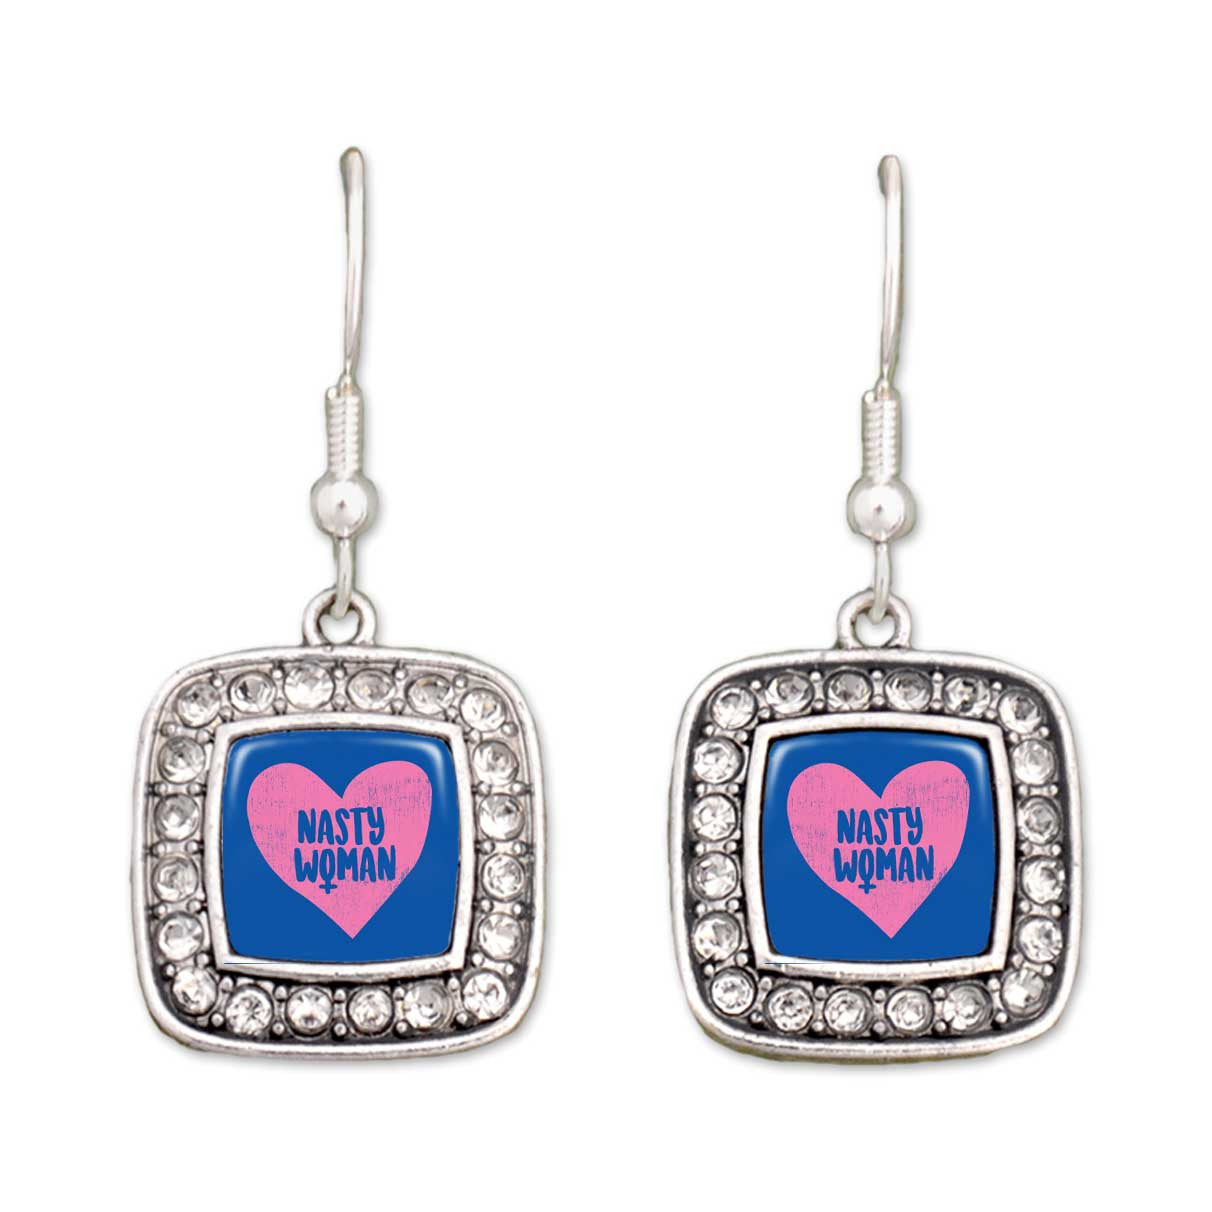 Nasty Woman Hillary Crystal Square Earrings